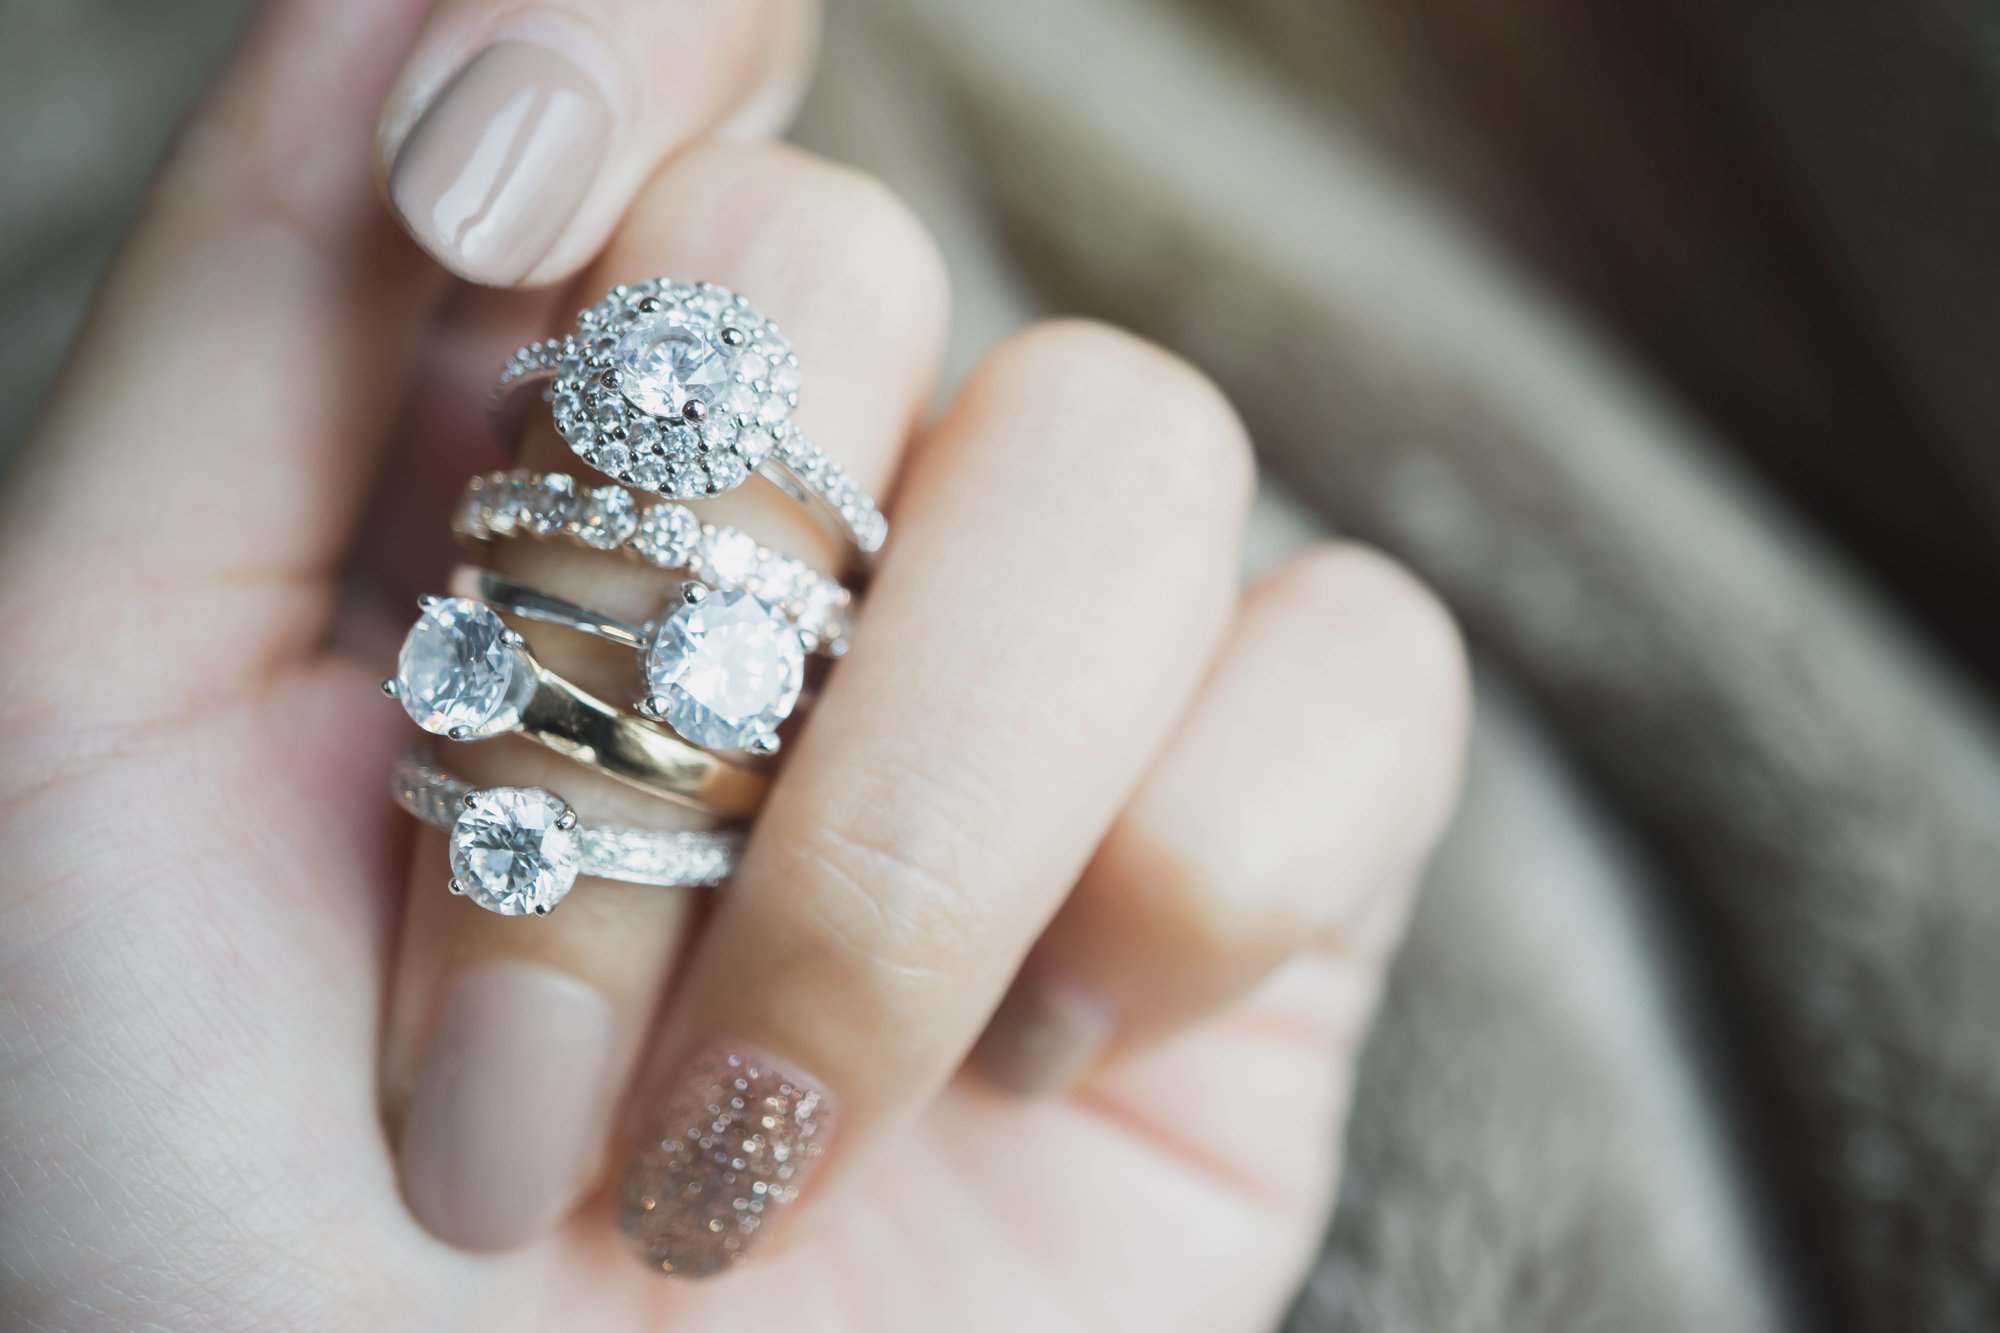 Many engagement rings on a woman's finger represent visual comparisons of diamond shapes in engagement rings.